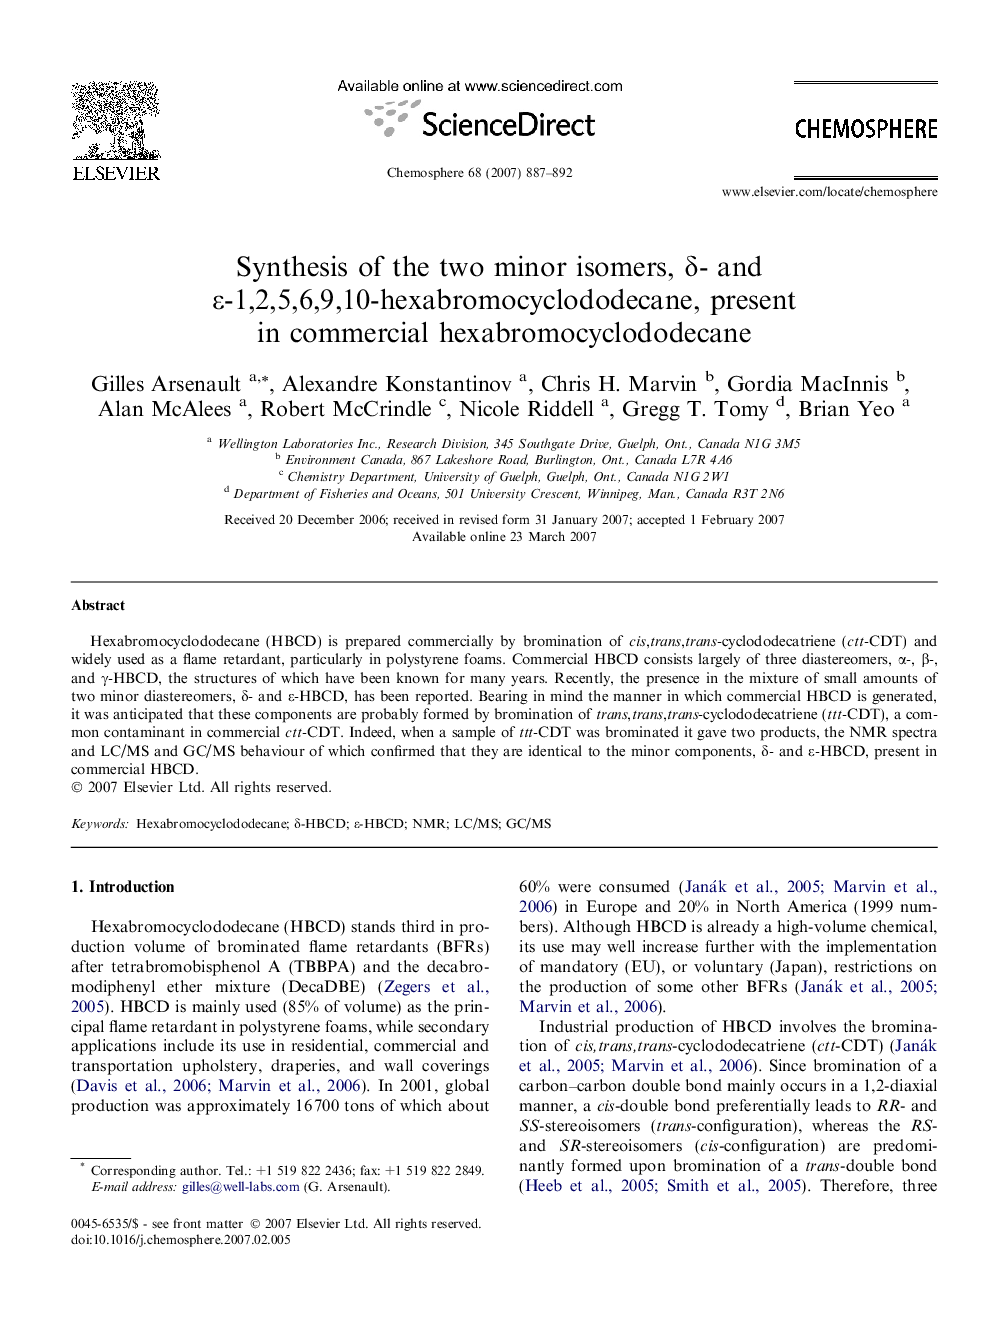 Synthesis of the two minor isomers, δ- and ε-1,2,5,6,9,10-hexabromocyclododecane, present in commercial hexabromocyclododecane